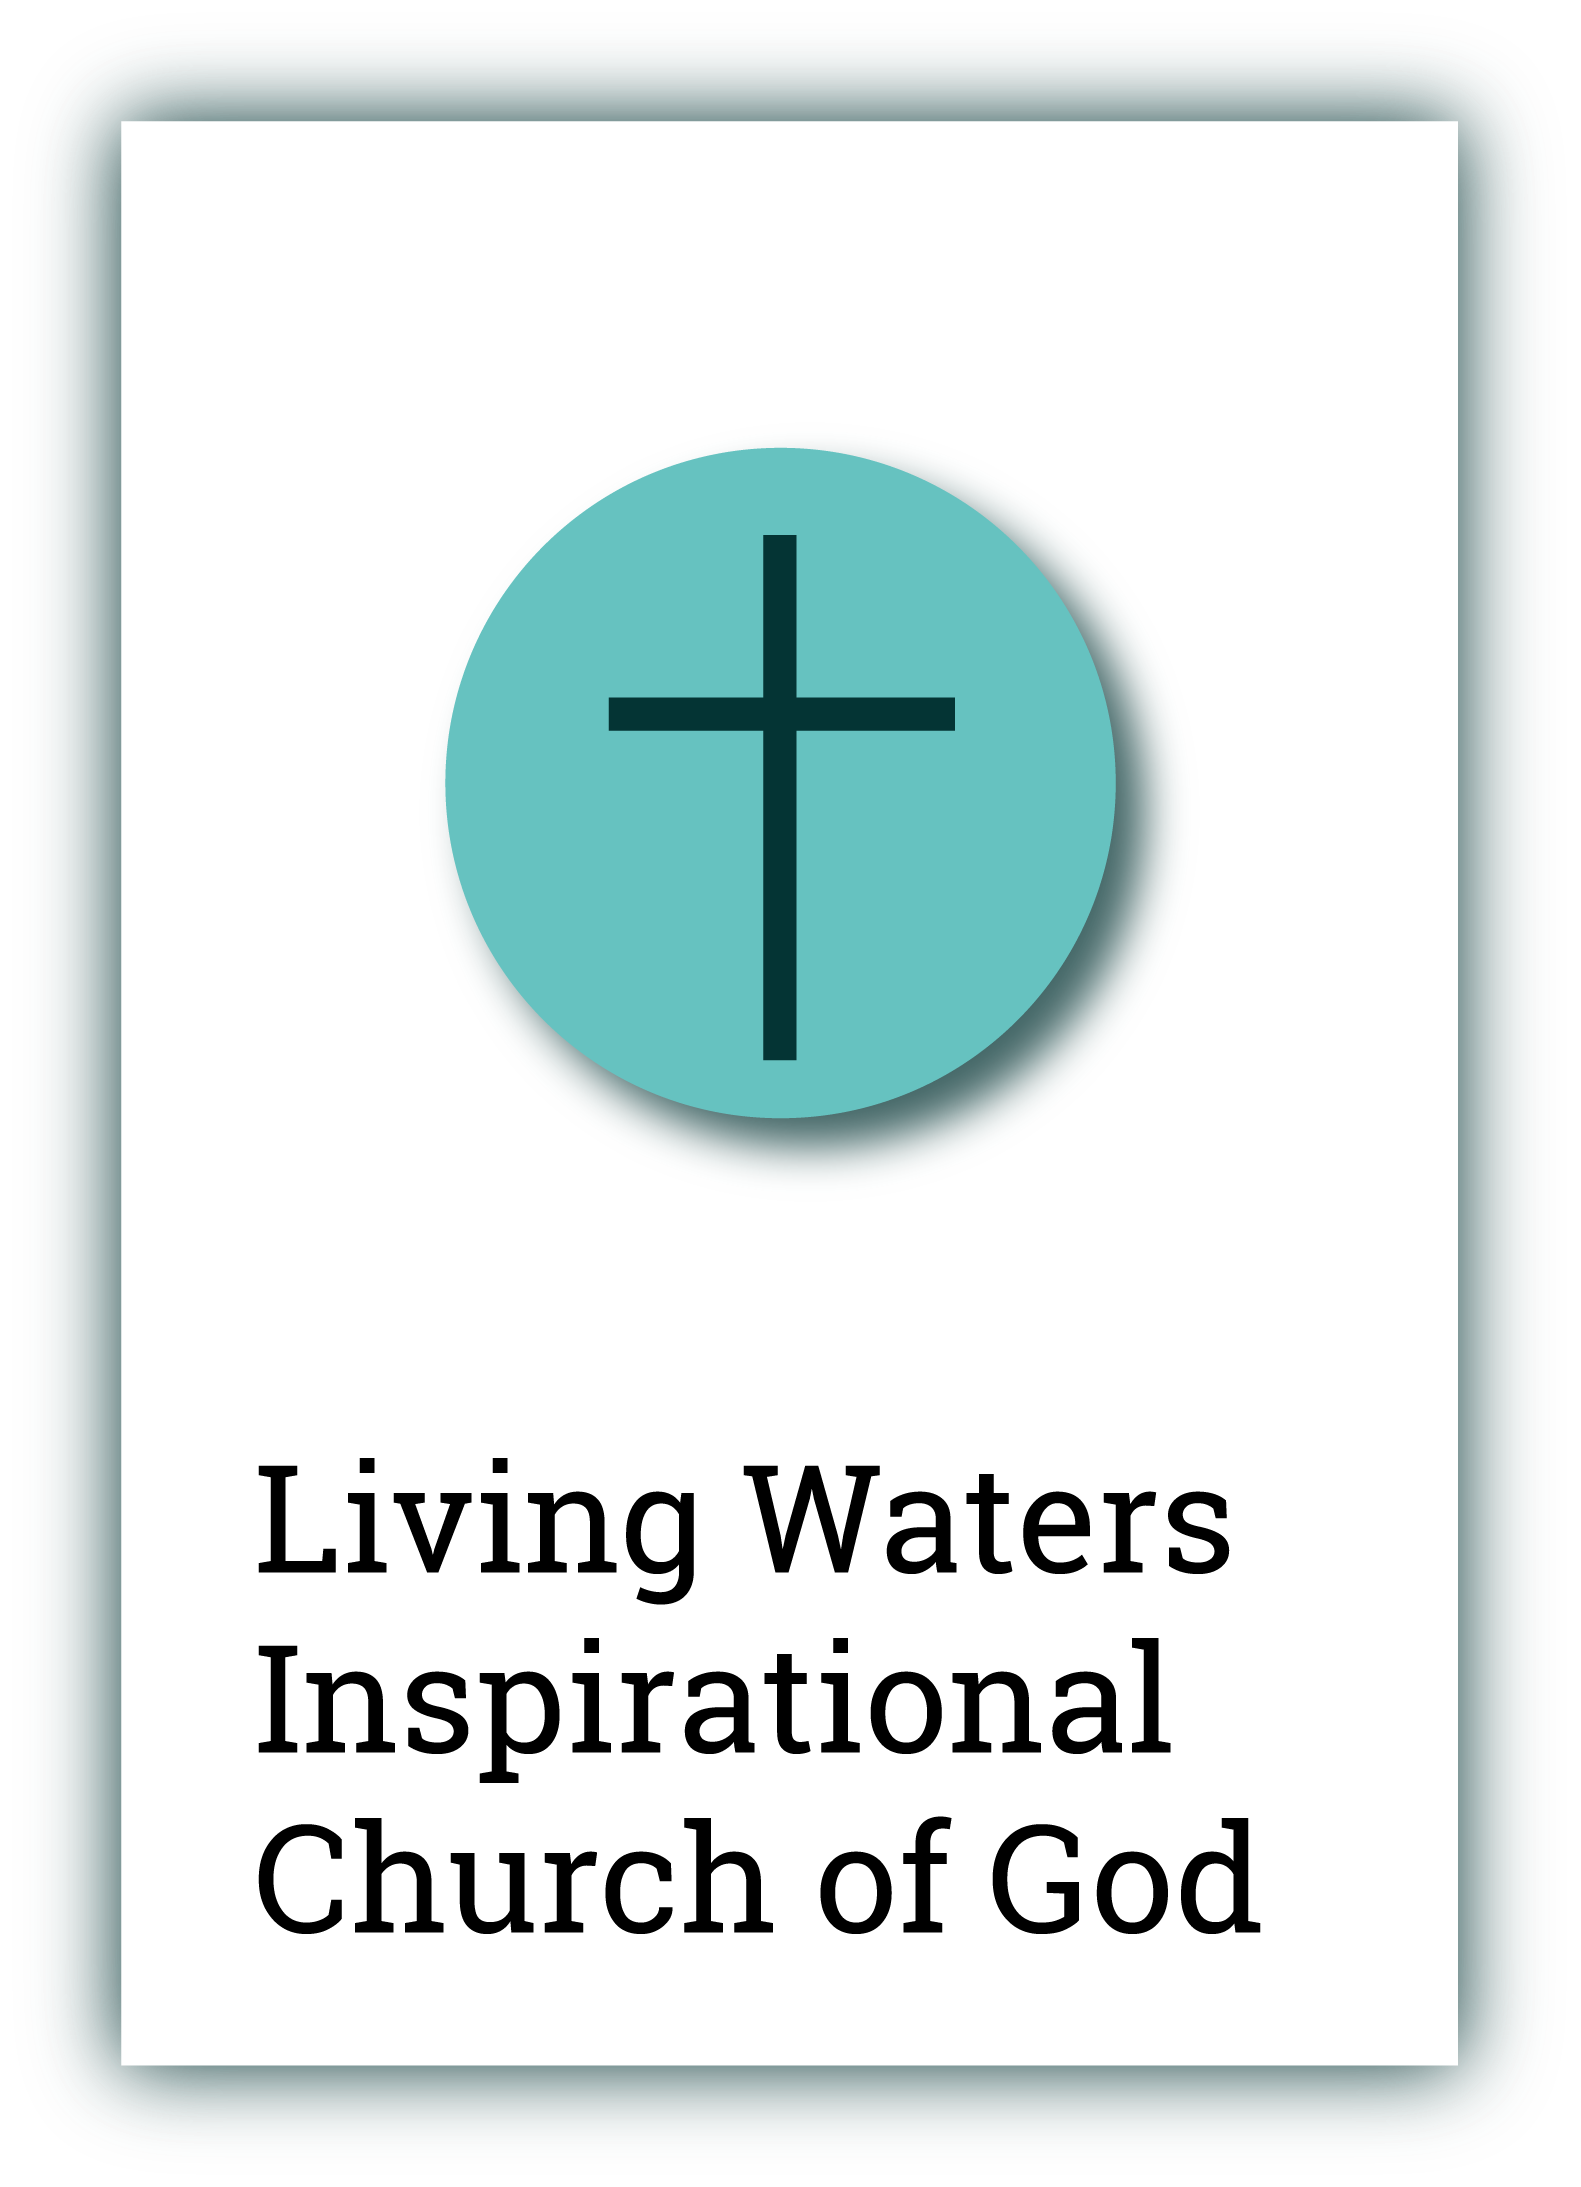 Living Waters Inspirational Church of God